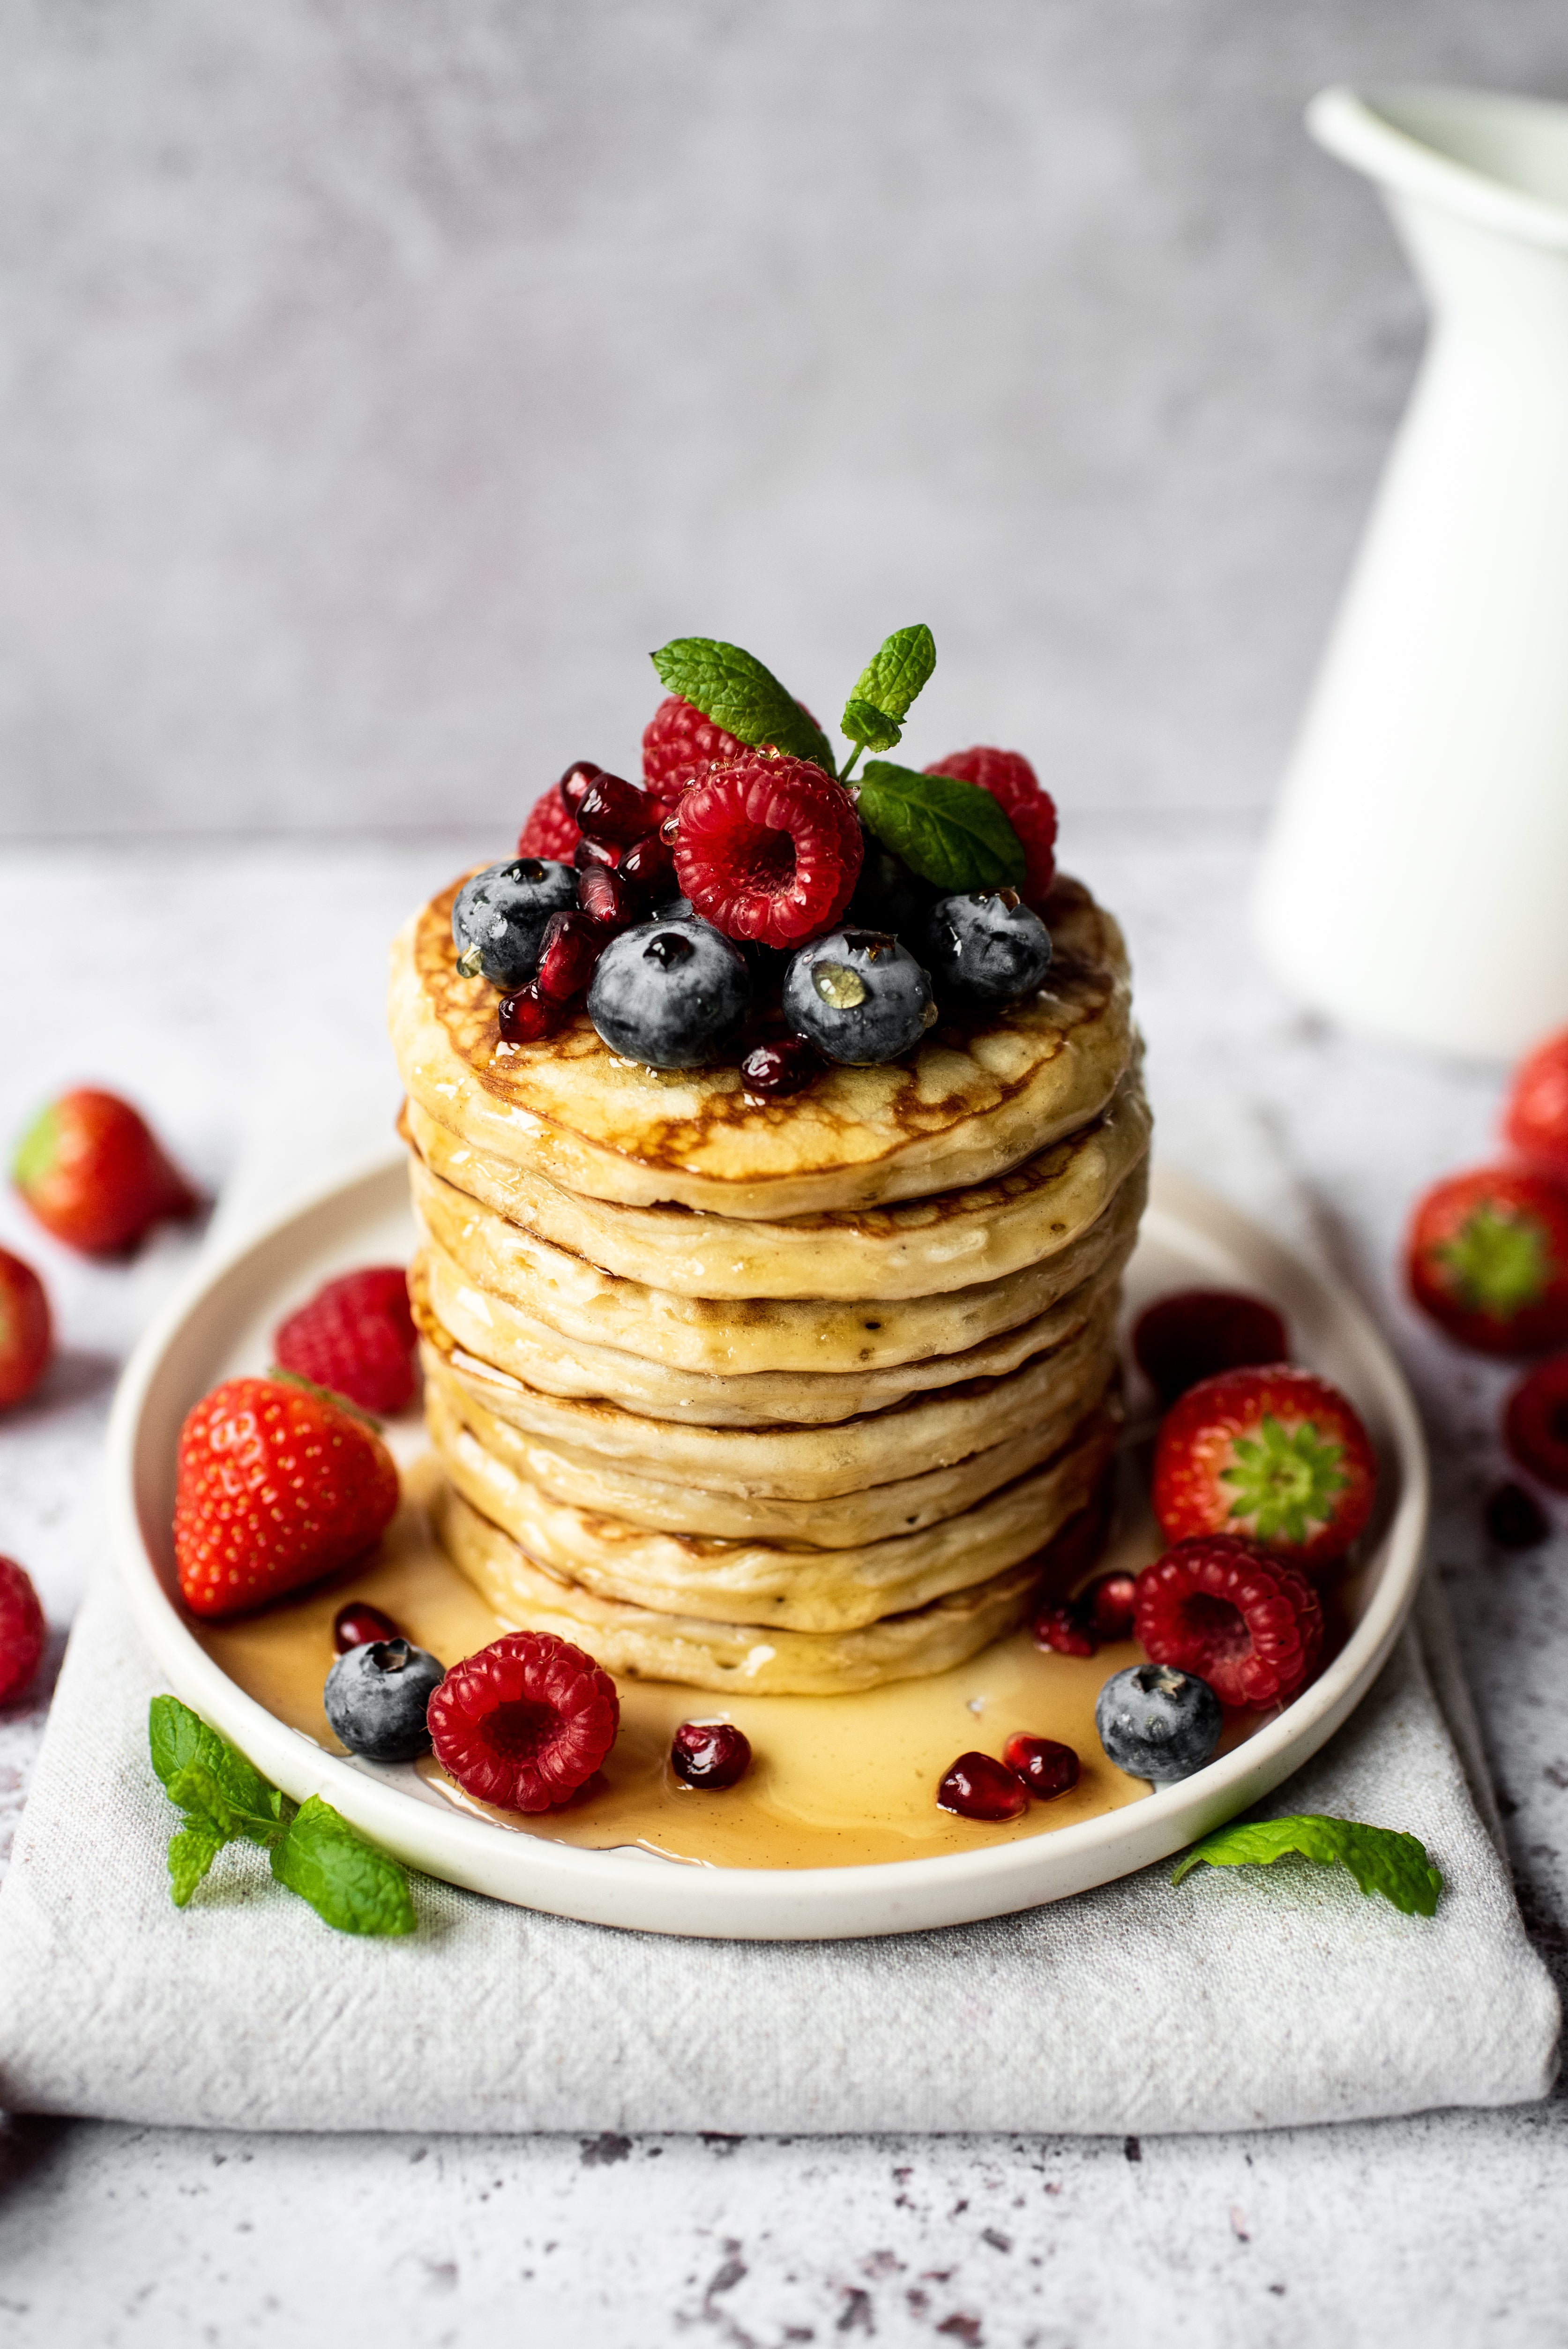 Stack of American pancakes drizzled with maple syrup and topped with fresh berries